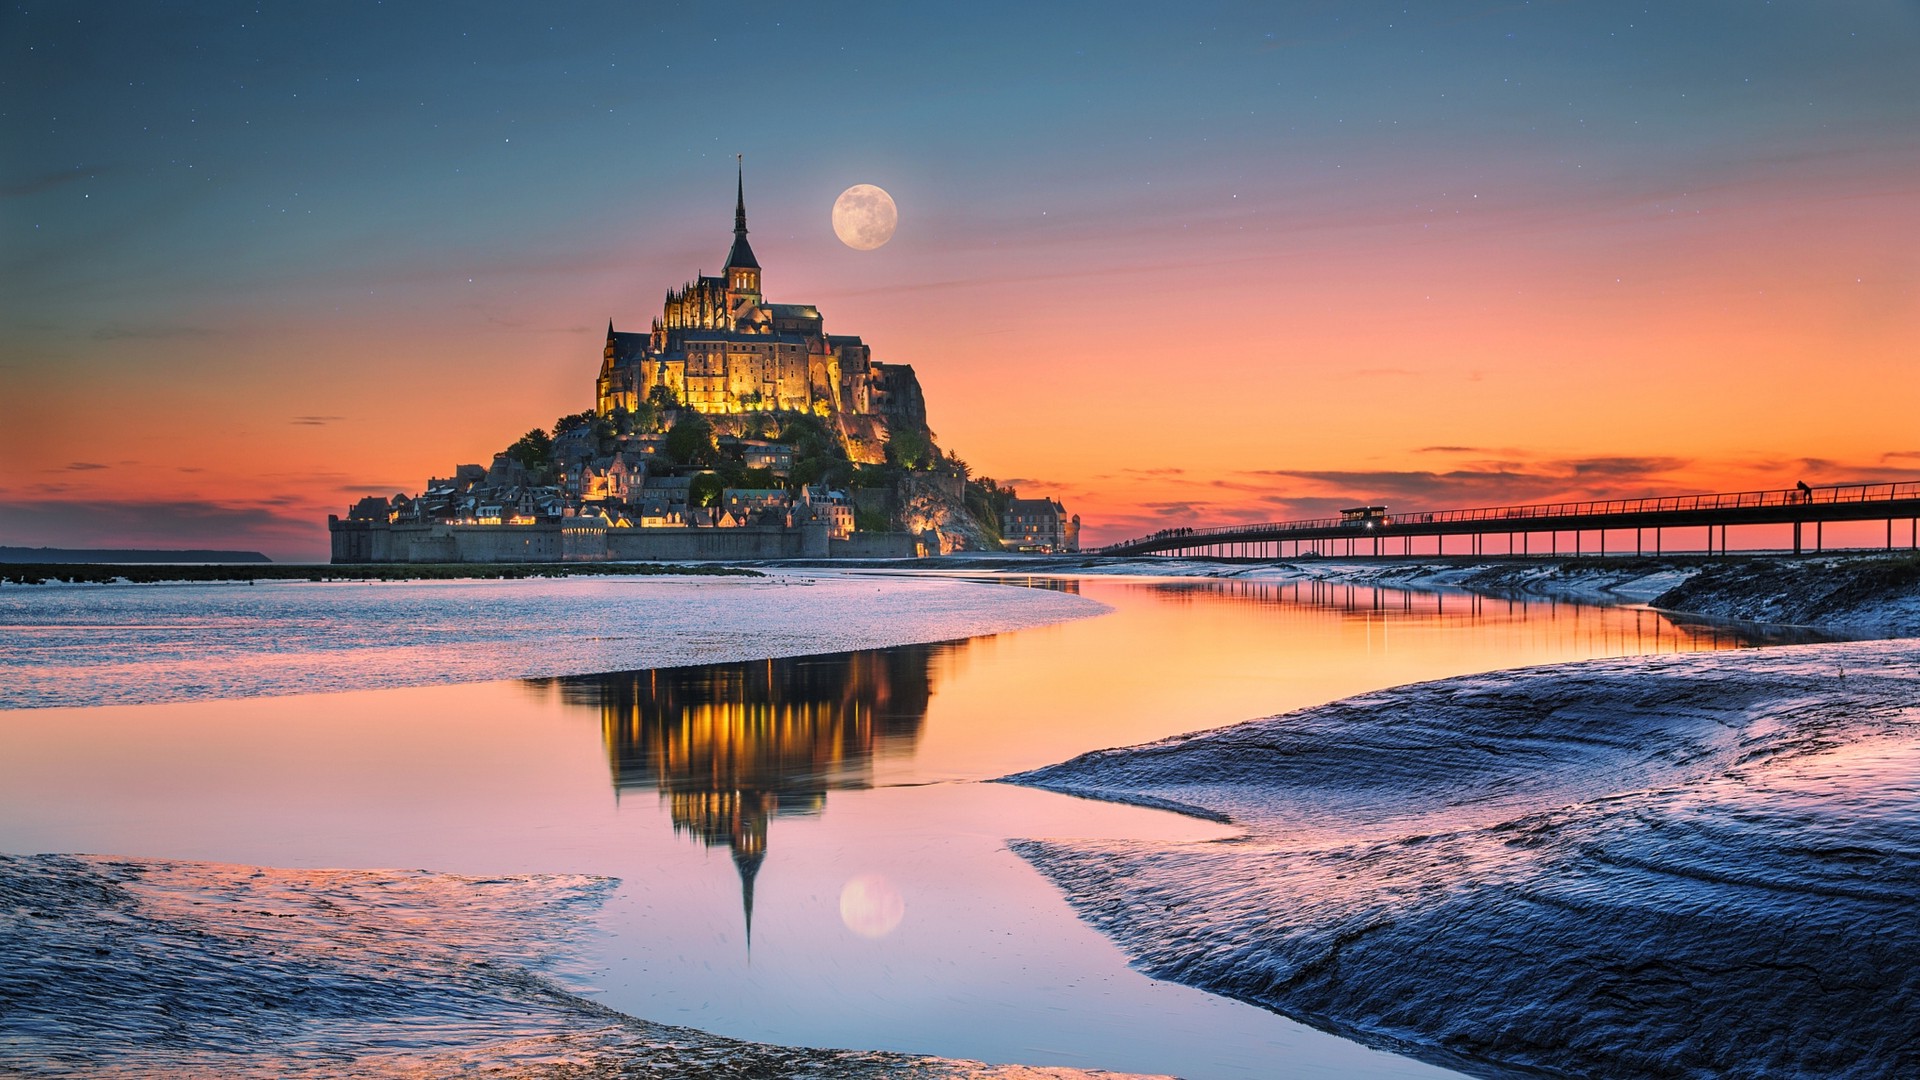 Landscape Nature Moon Bridge France Church Island River Water Sunset Architecture Monastery History World Heritage Site Lemontstmichel Wallpapers Hd Desktop And Mobile Backgrounds